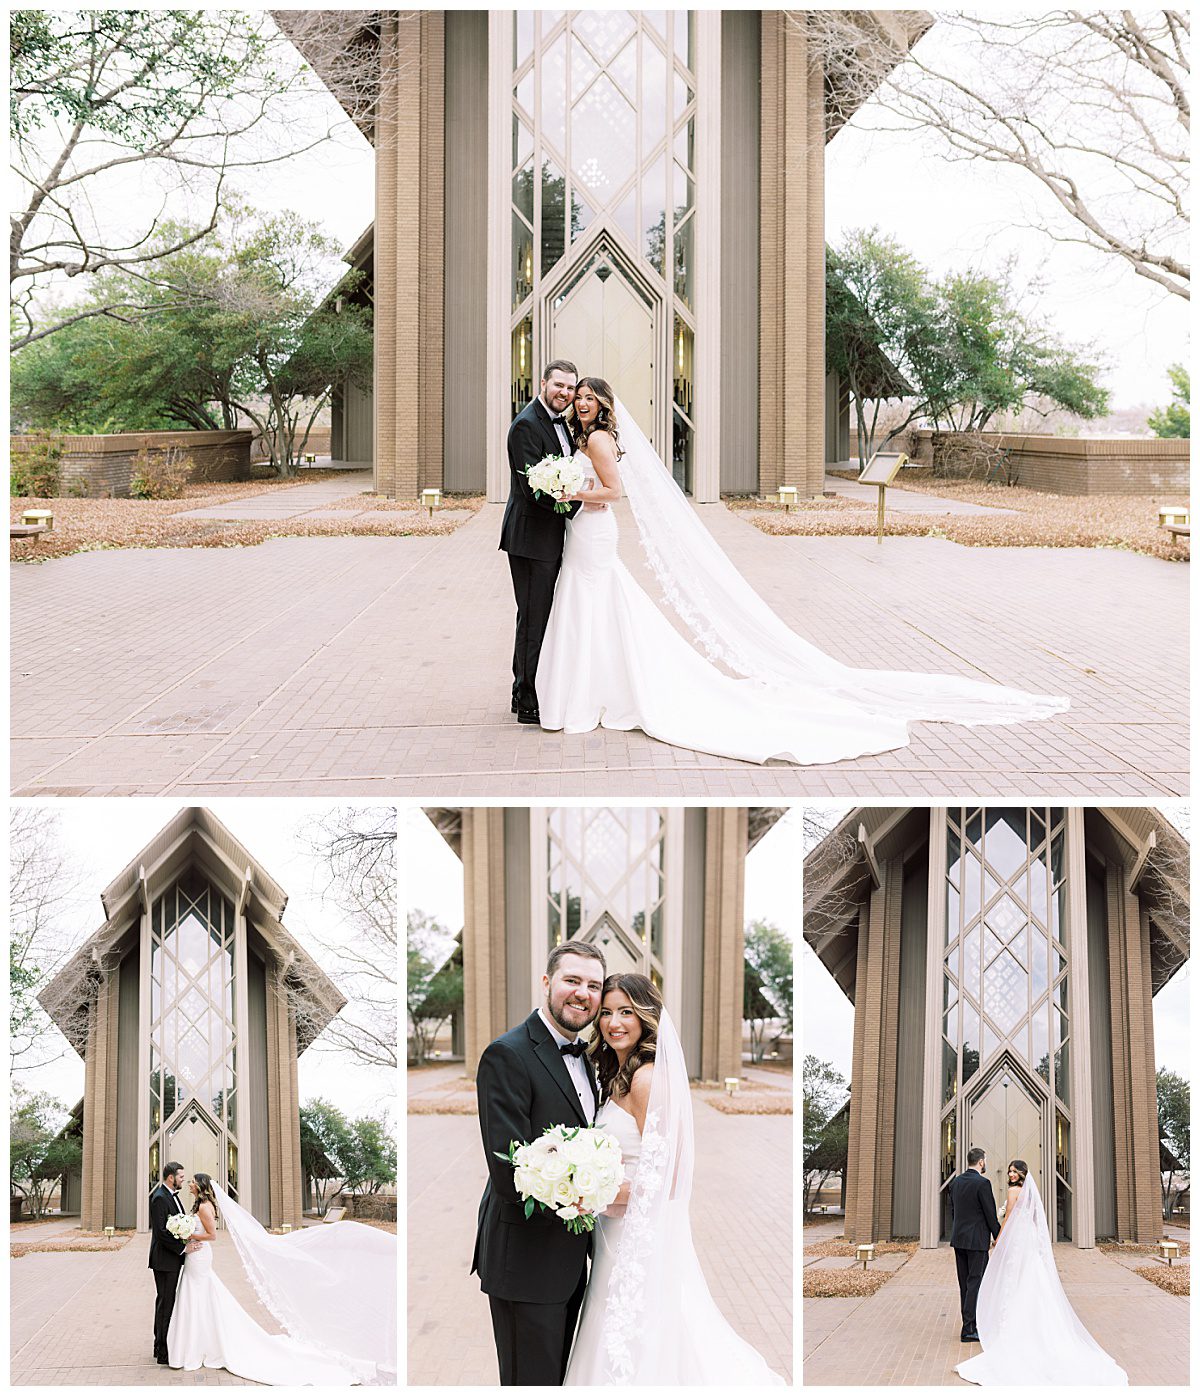 Bride and groom portraits at The Marty Leonard Chapel in Fort Worth, Texas taken by Brittany Partain, a DFW wedding photographer. 